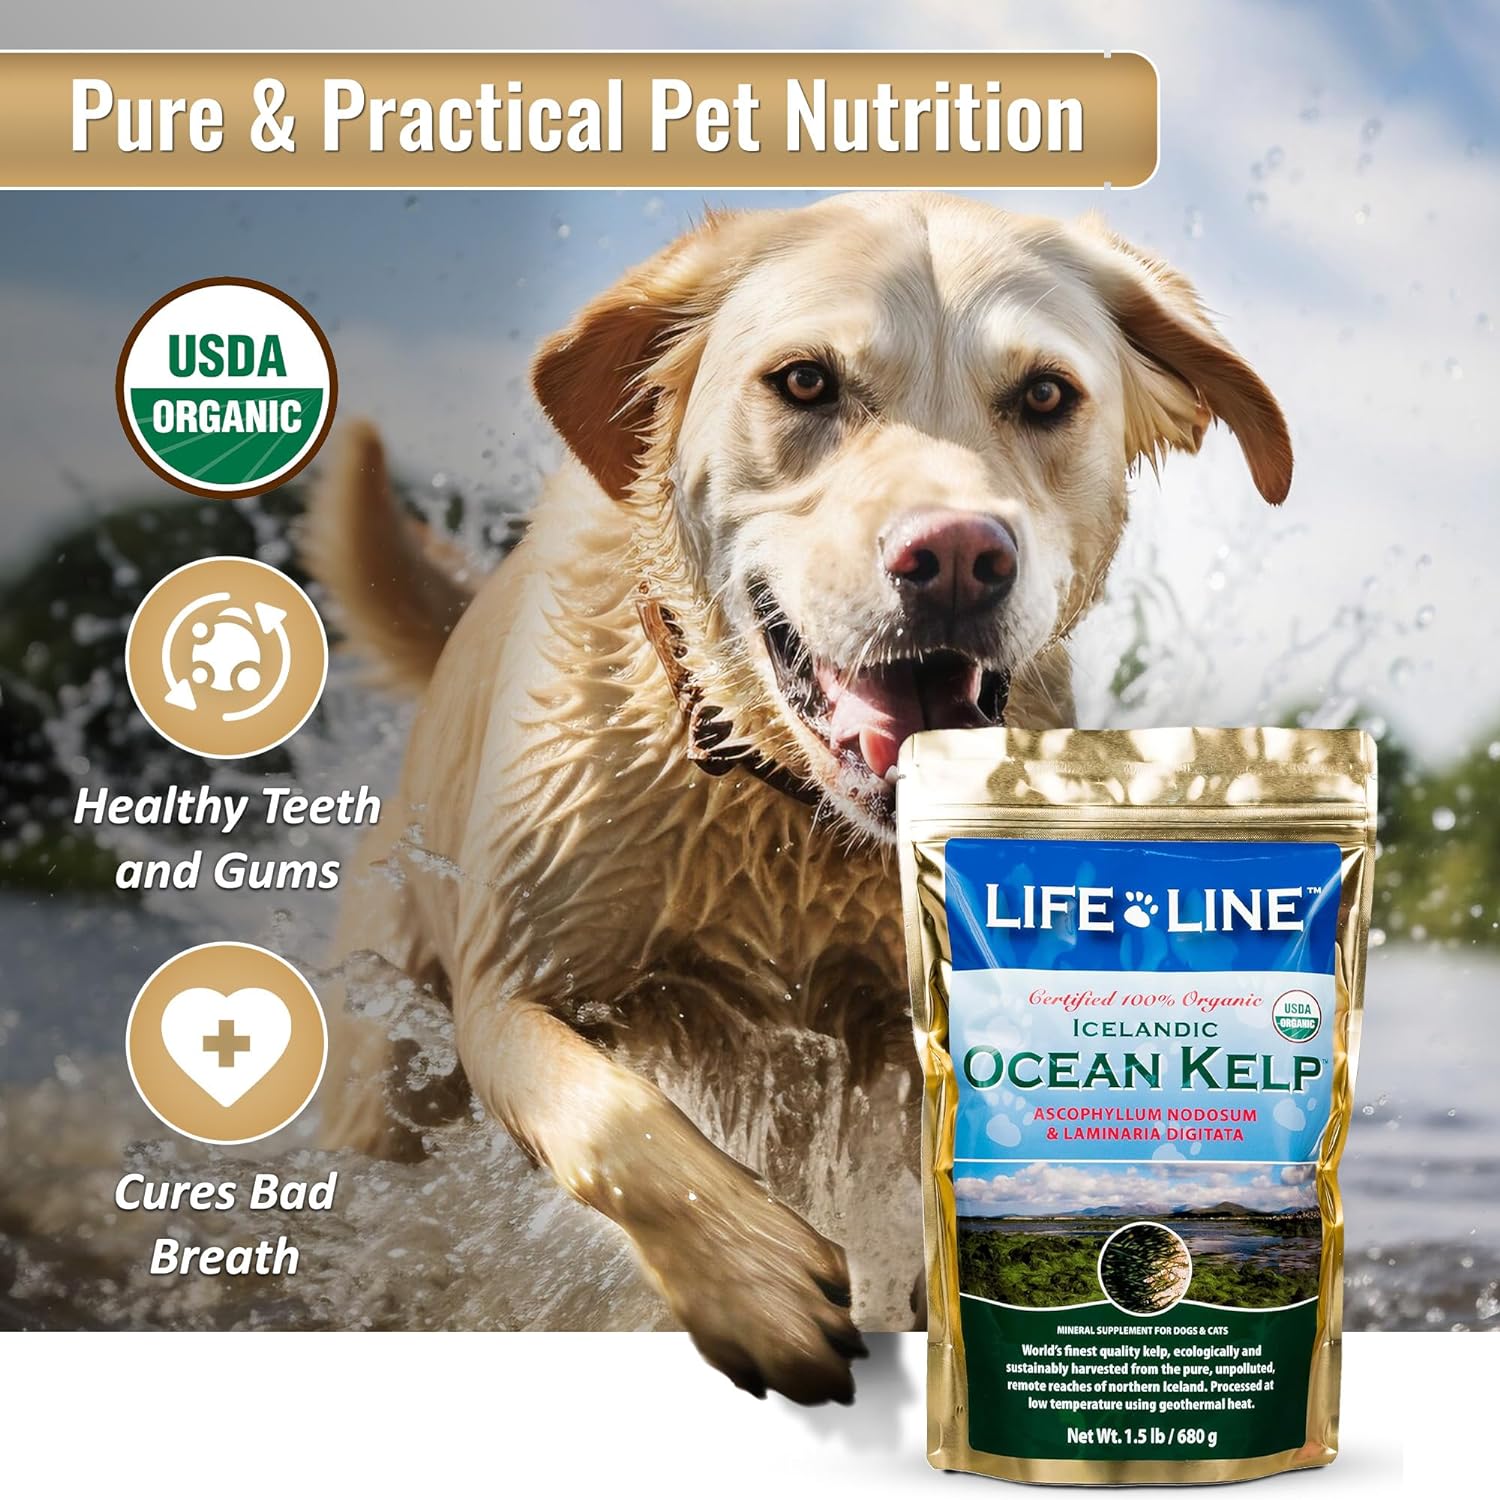 Life Line Pet Nutrition Organic Ocean Kelp Supplement for Skin & Coat, Digestion in Dogs & Cats,1.5lb, Model:20201 : Horse Nutritional Supplements And Remedies : Pet Supplies